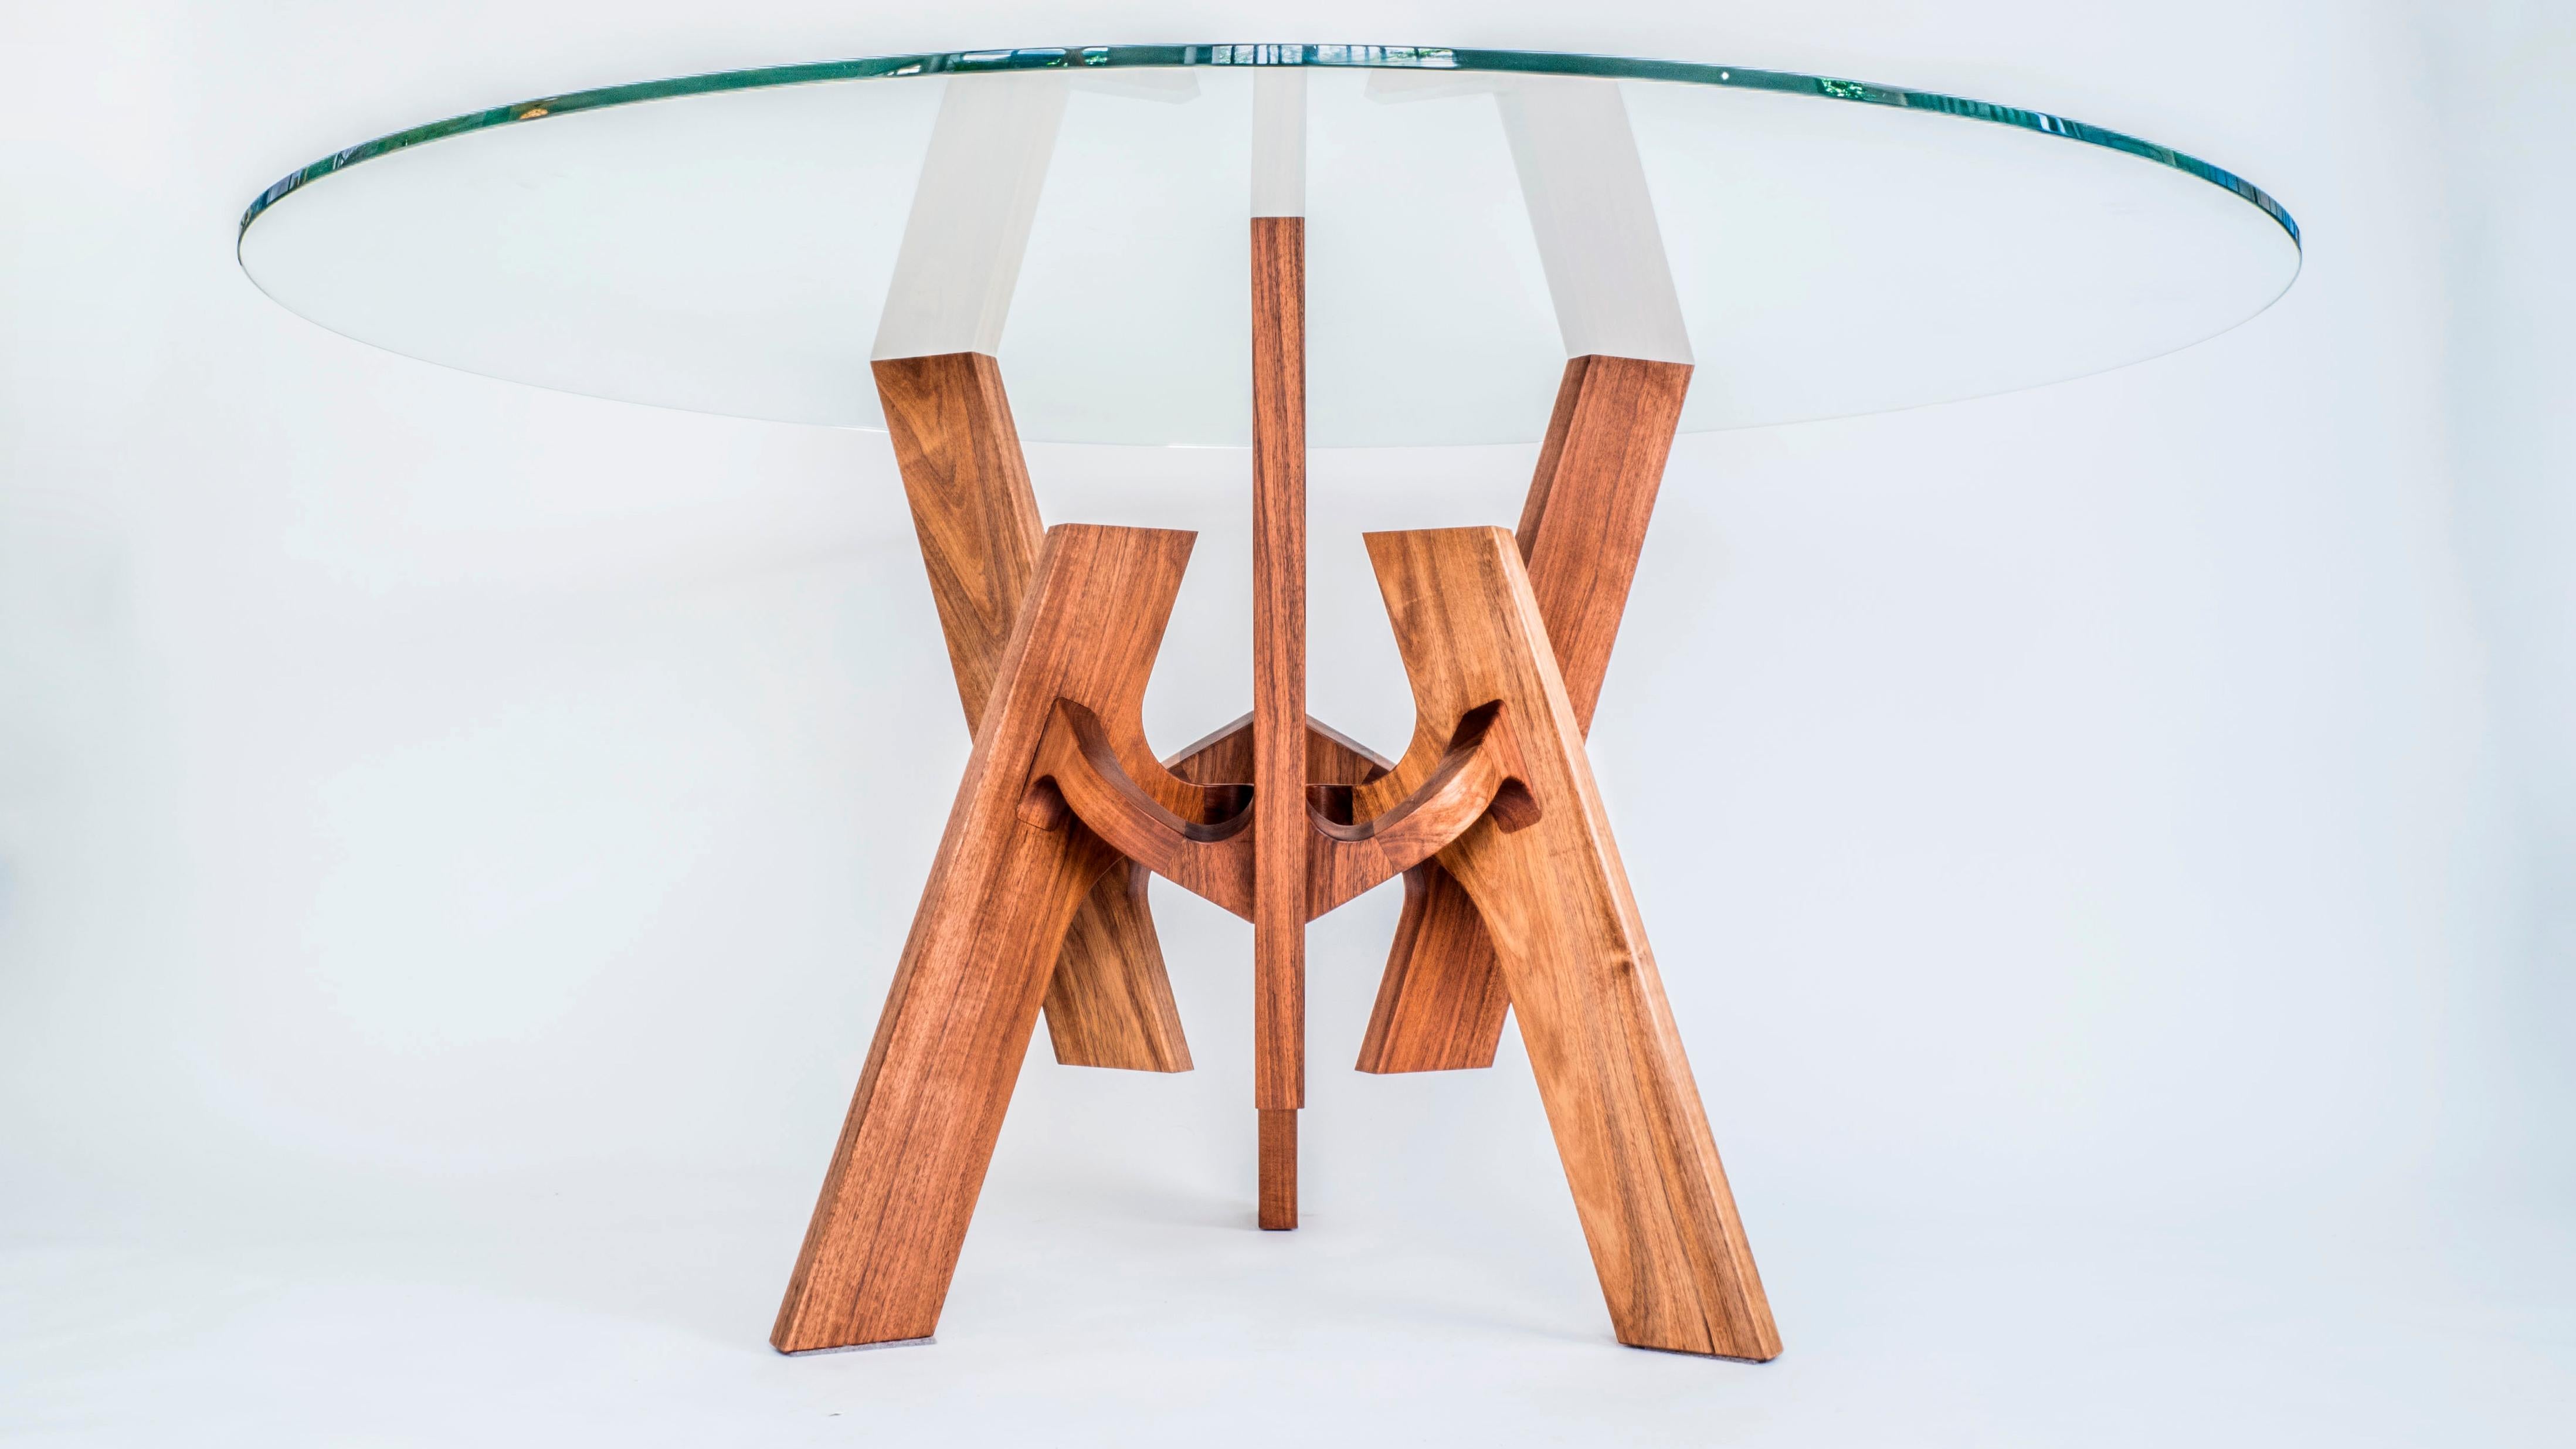 Astra, Geometric Sculptural Center Table Made of Solid Wood by Pedro Cerisola For Sale 11